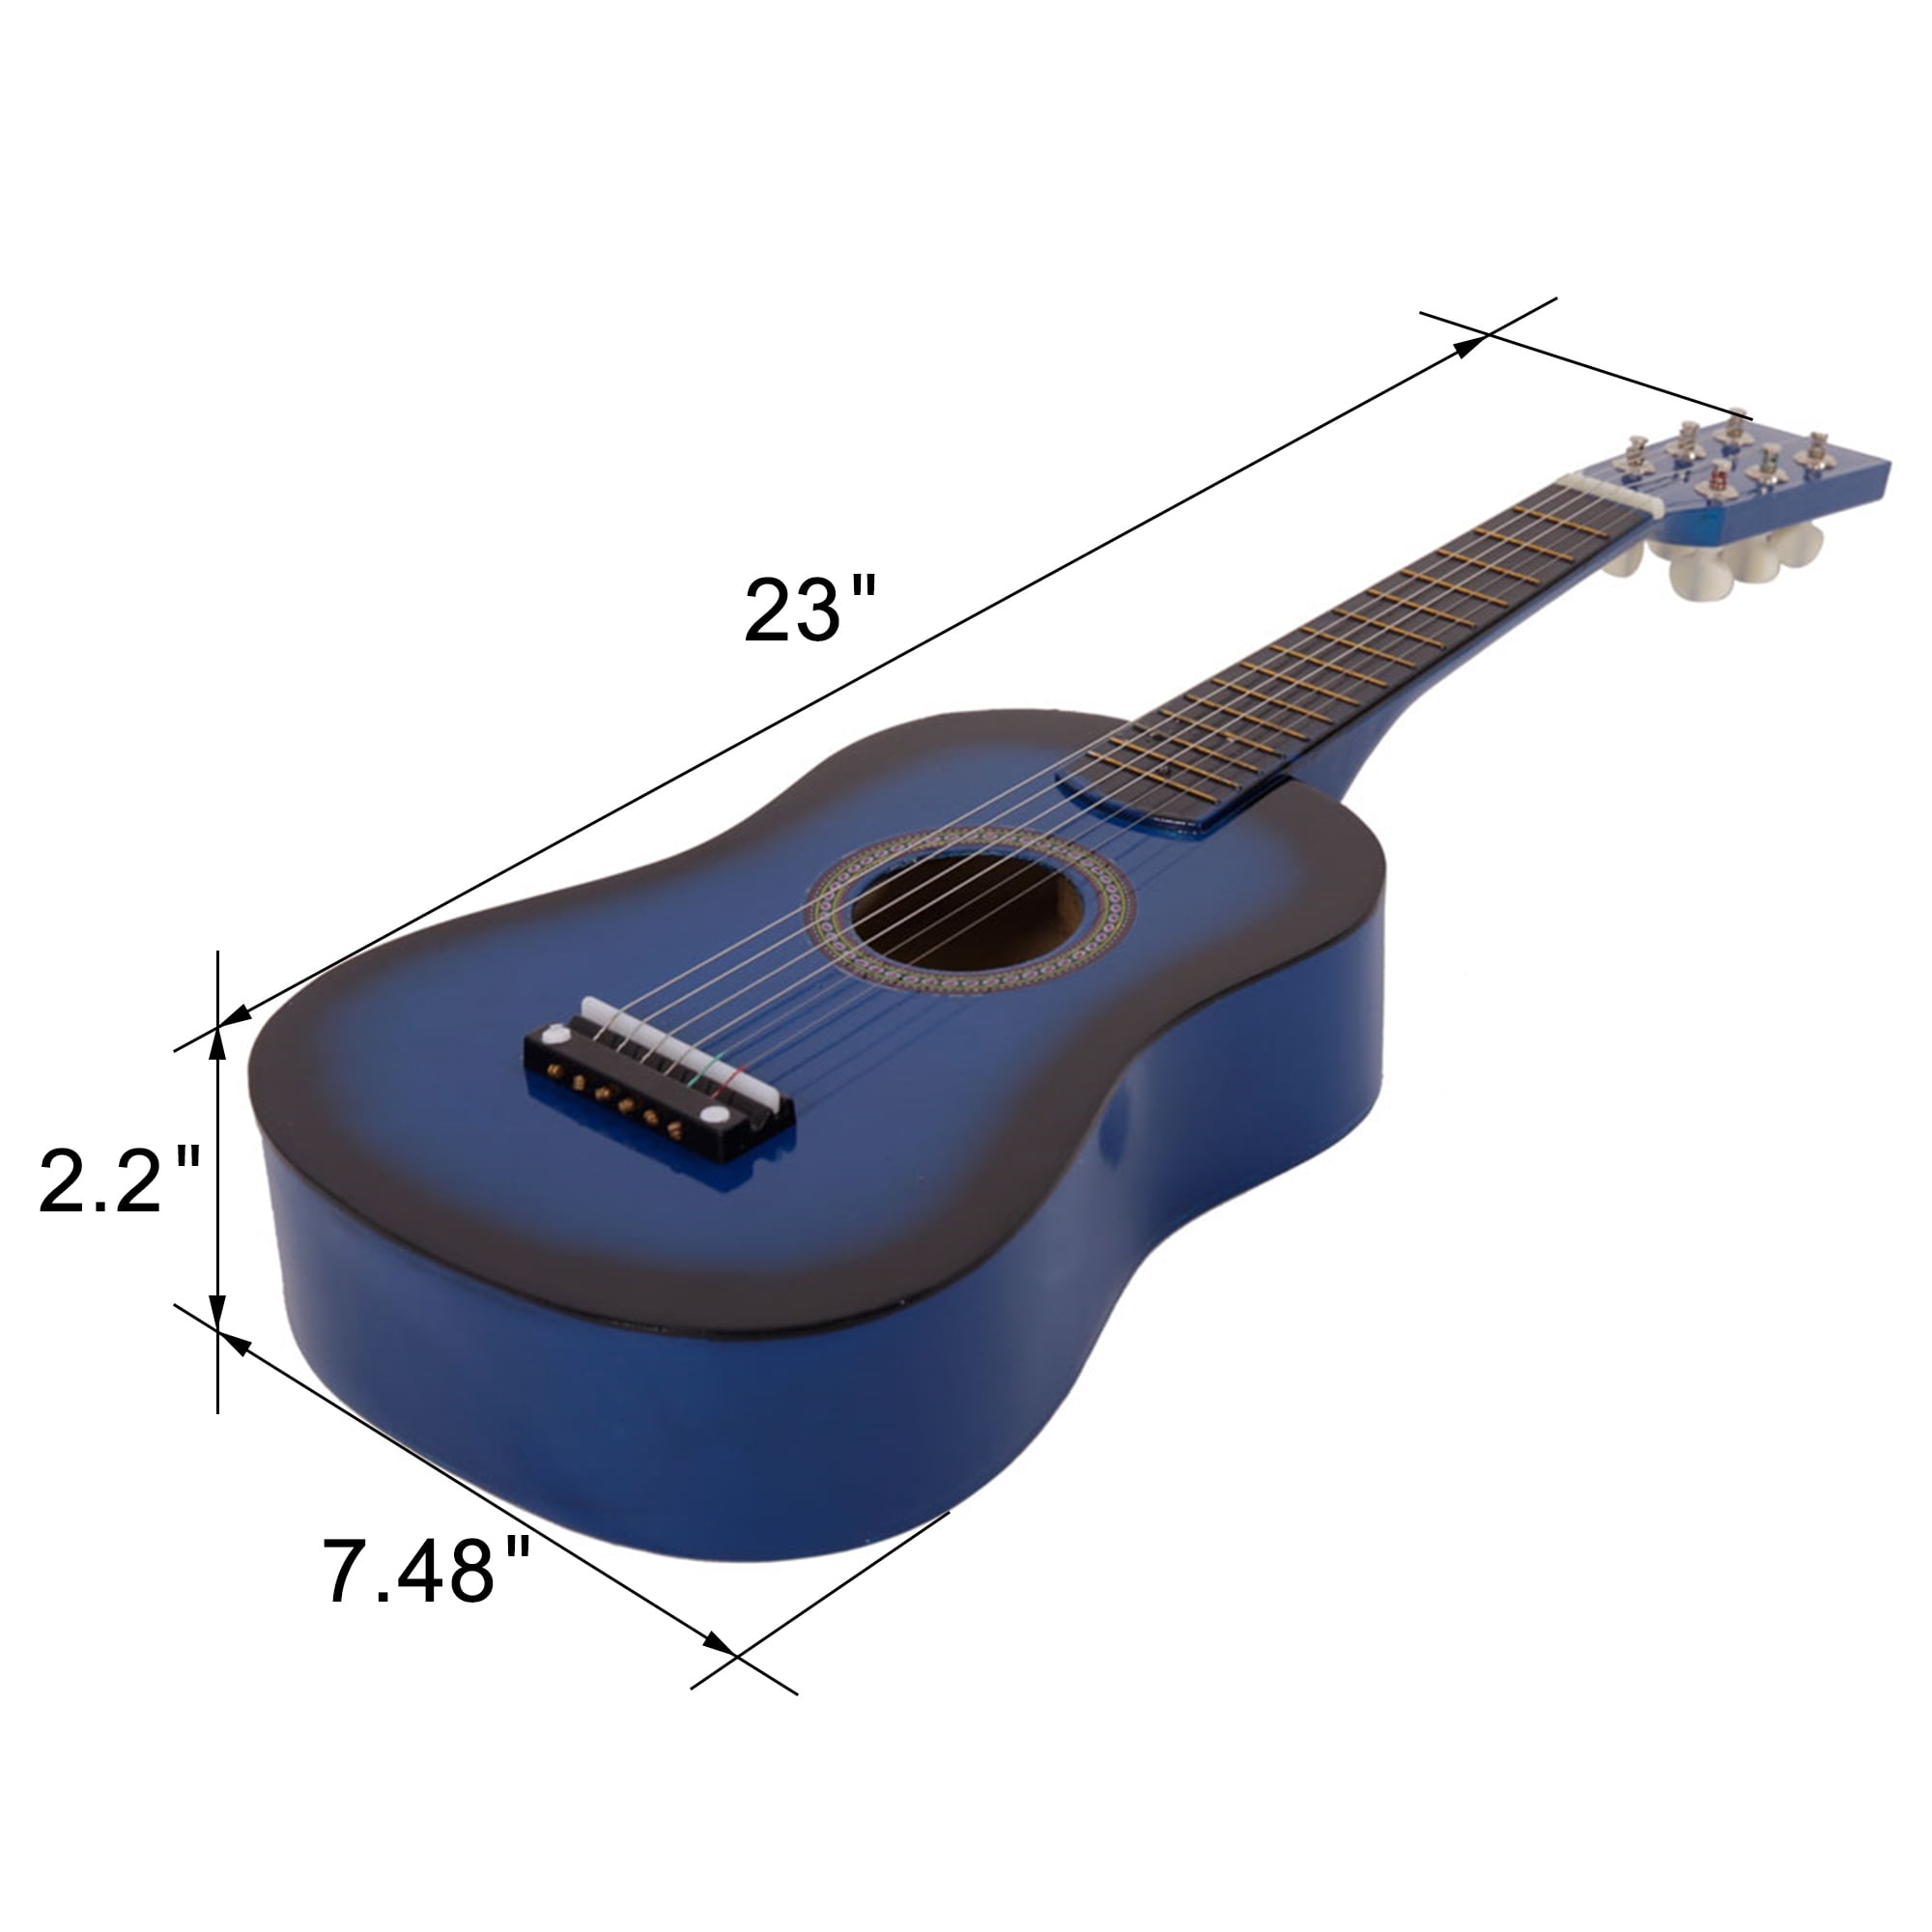 Spaco 23 Acoustic Guitar Toy with Pick & Strings Blue 